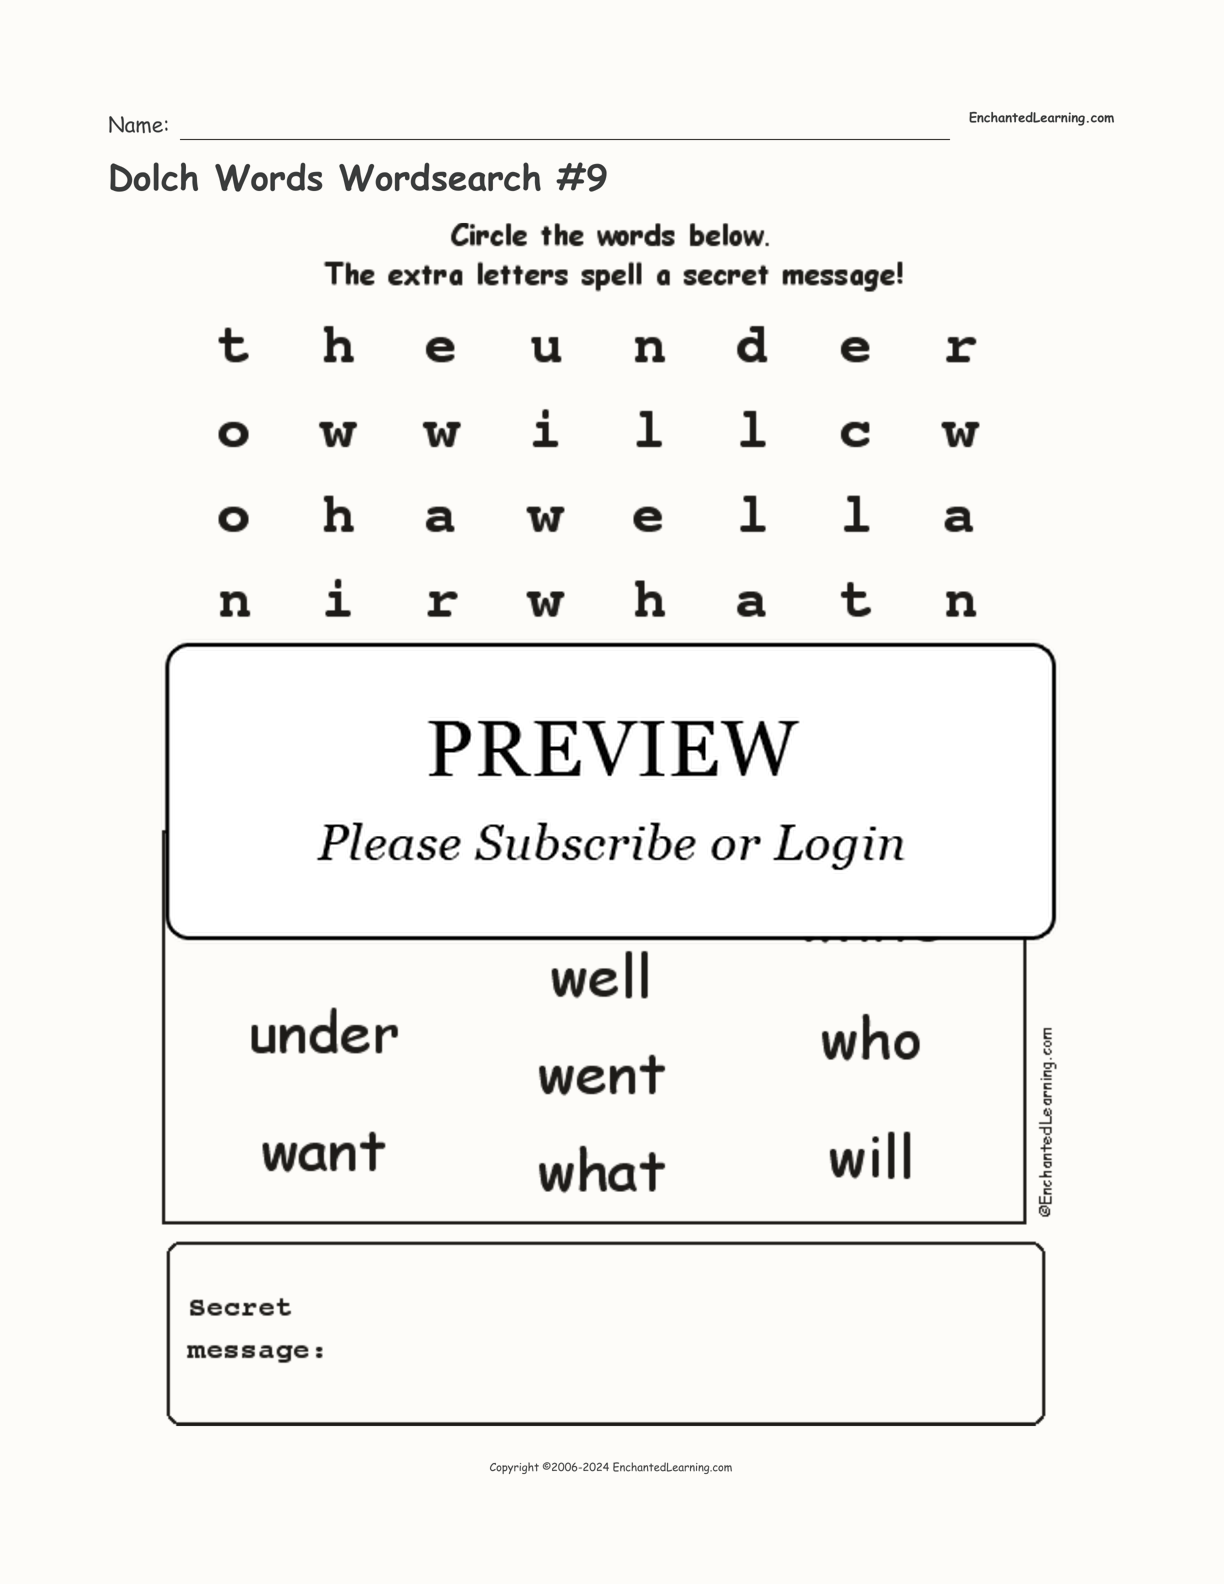 Dolch Words Wordsearch #9 interactive worksheet page 1